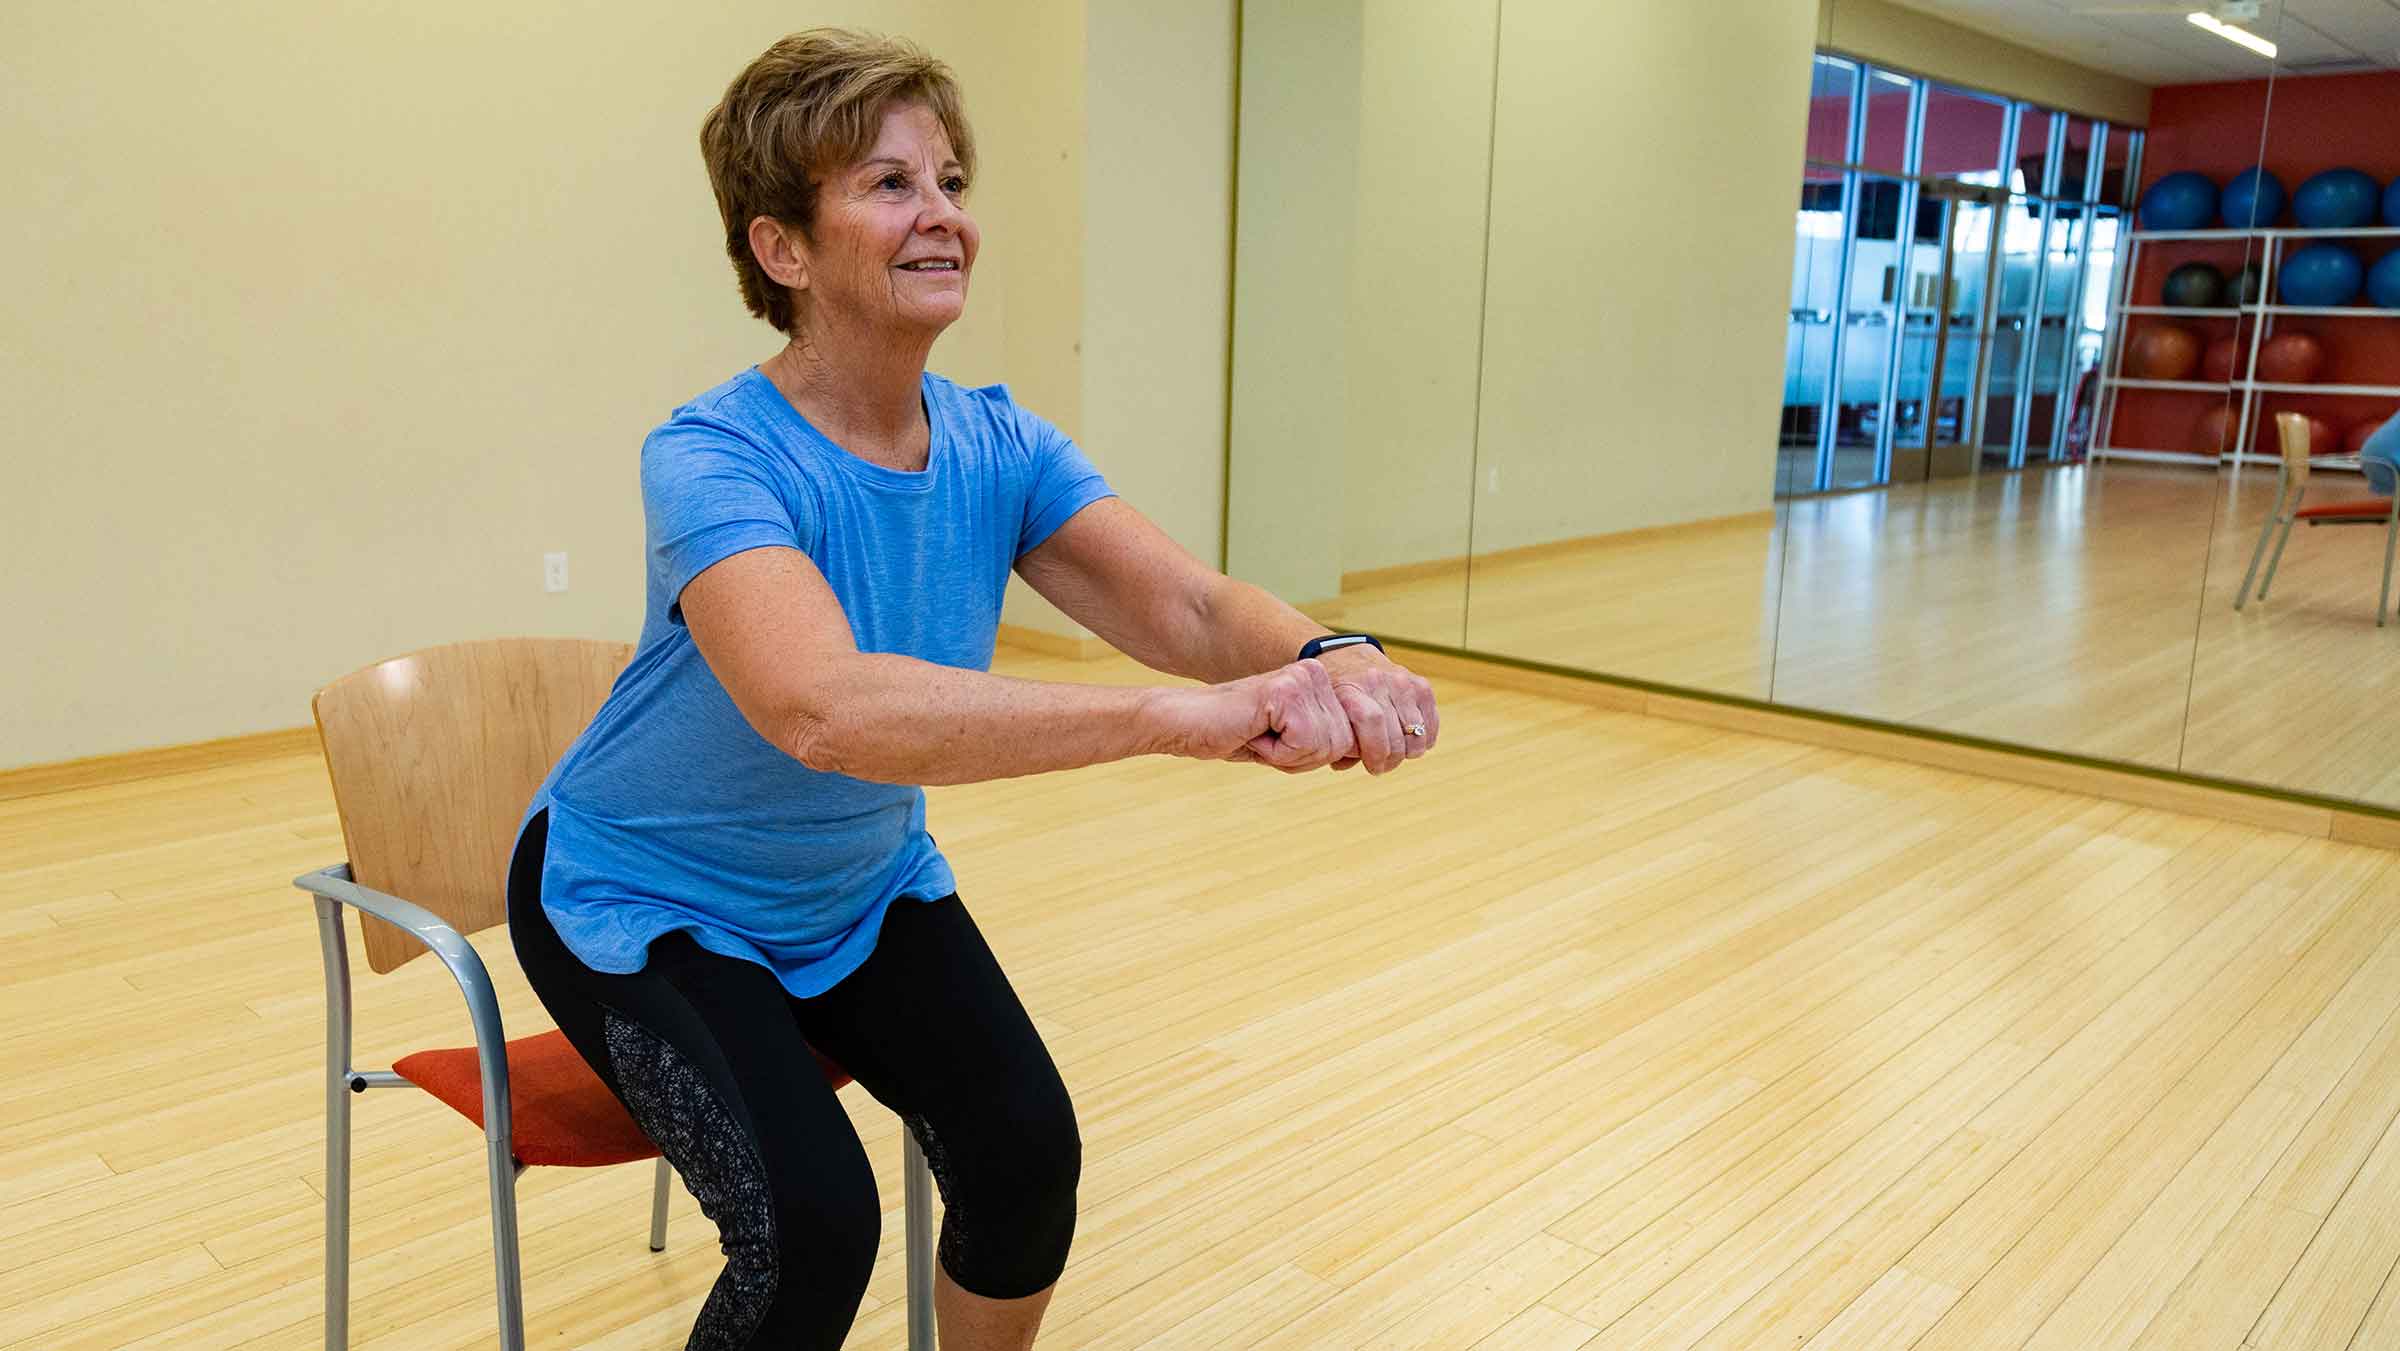 5 at-home strength exercises to help build muscle as you age